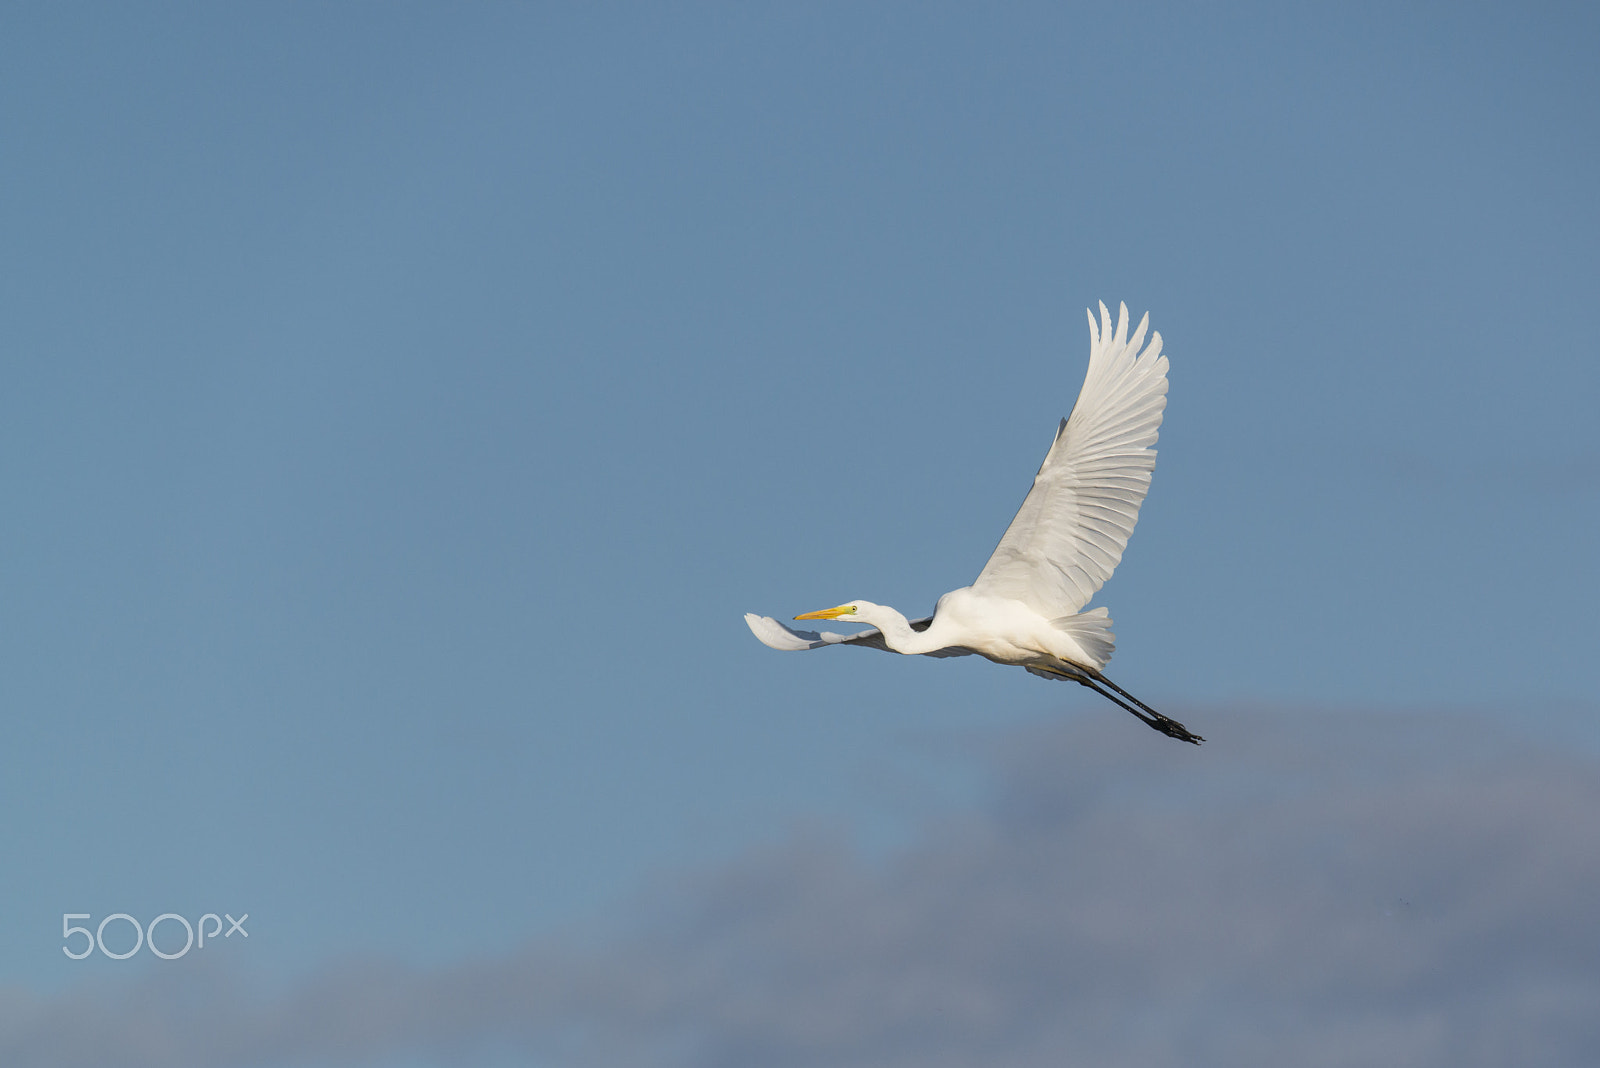 Nikon D800 + Sigma 150-600mm F5-6.3 DG OS HSM | S sample photo. Great white heron in the sky with wide spread wings photography